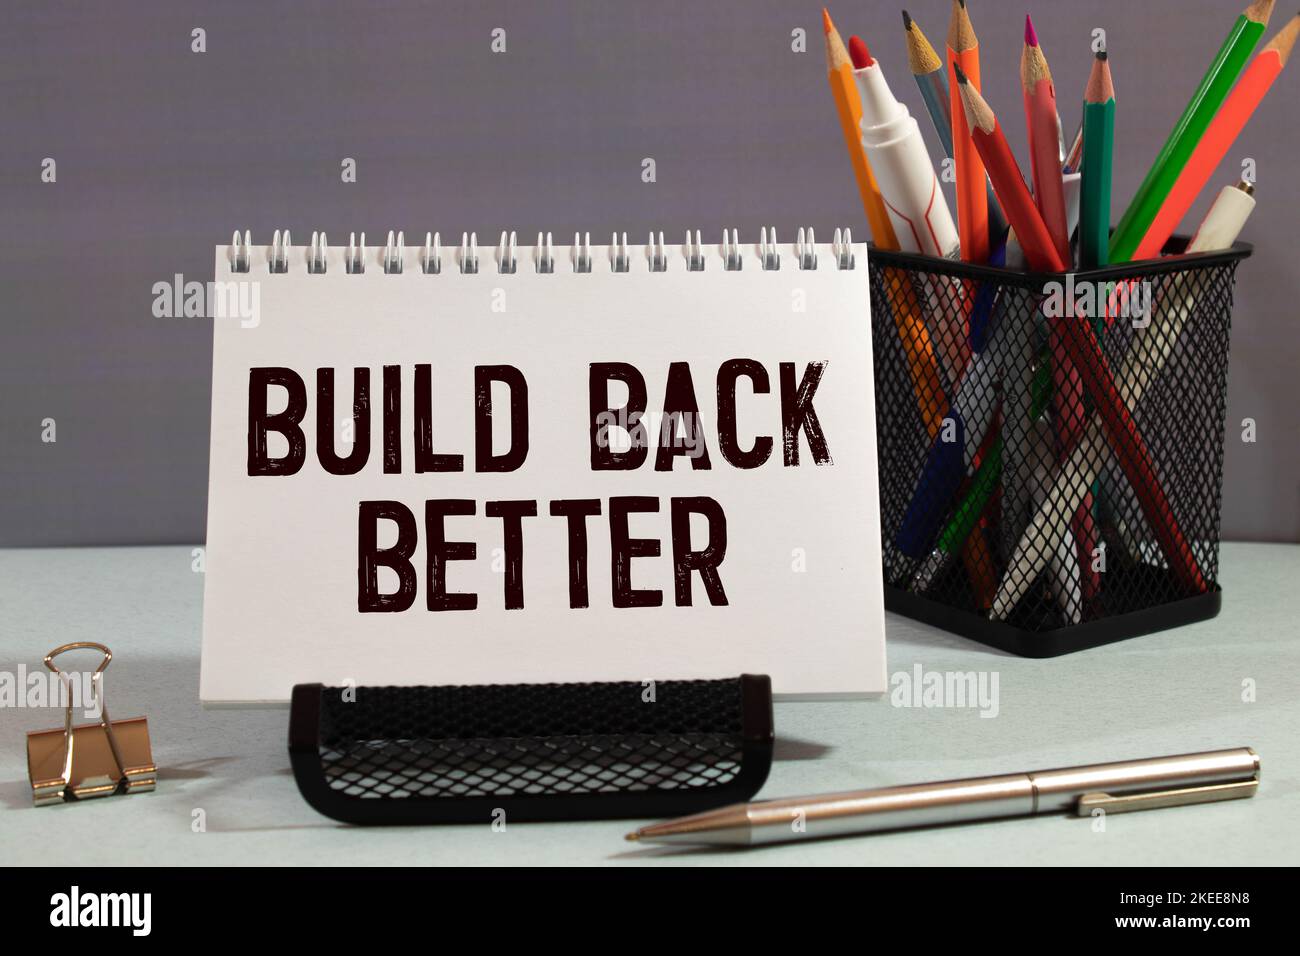 Build back better written in white chalk on a black chalkboard isolated on white Stock Photo